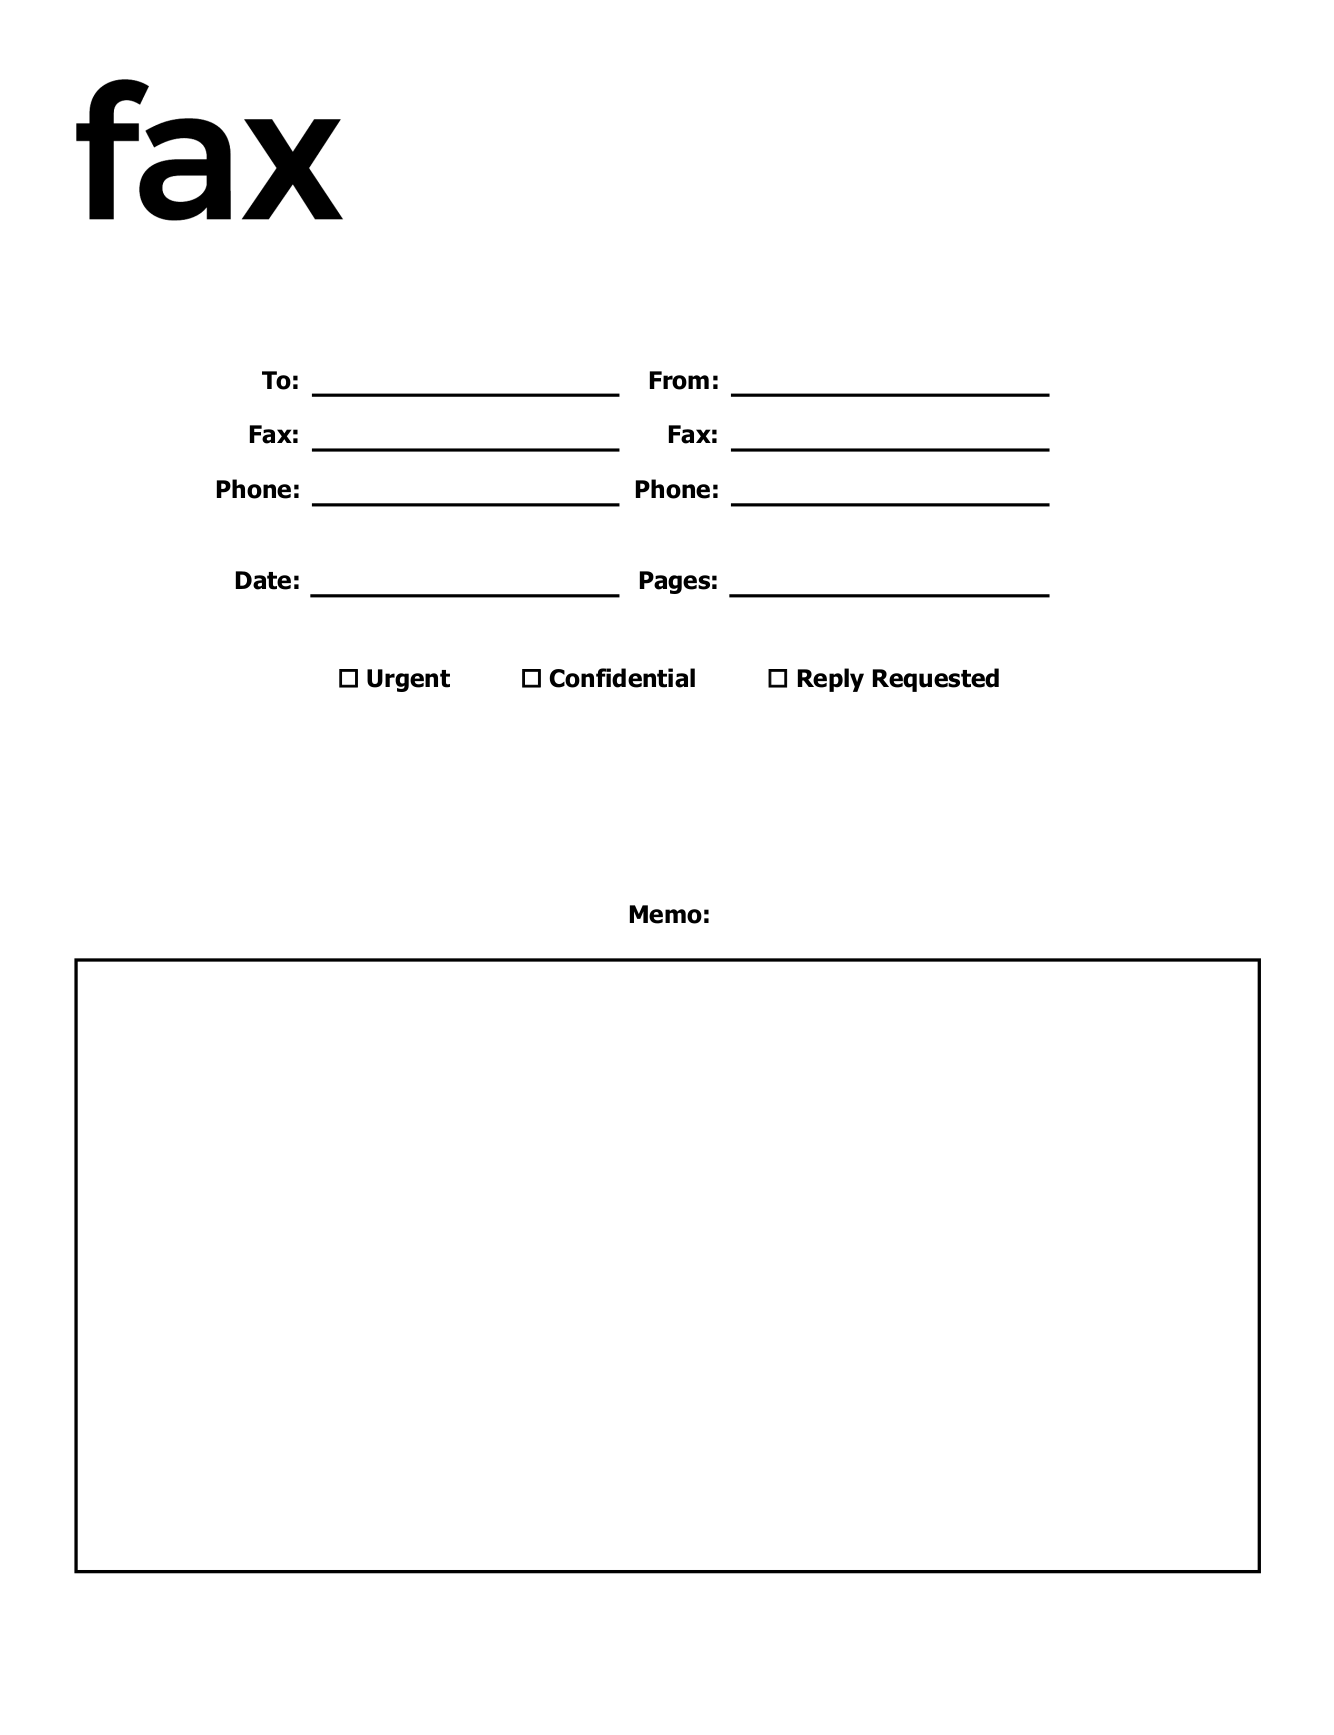 basic-fax-cover-sheet-free-printable-printable-form-templates-and-letter